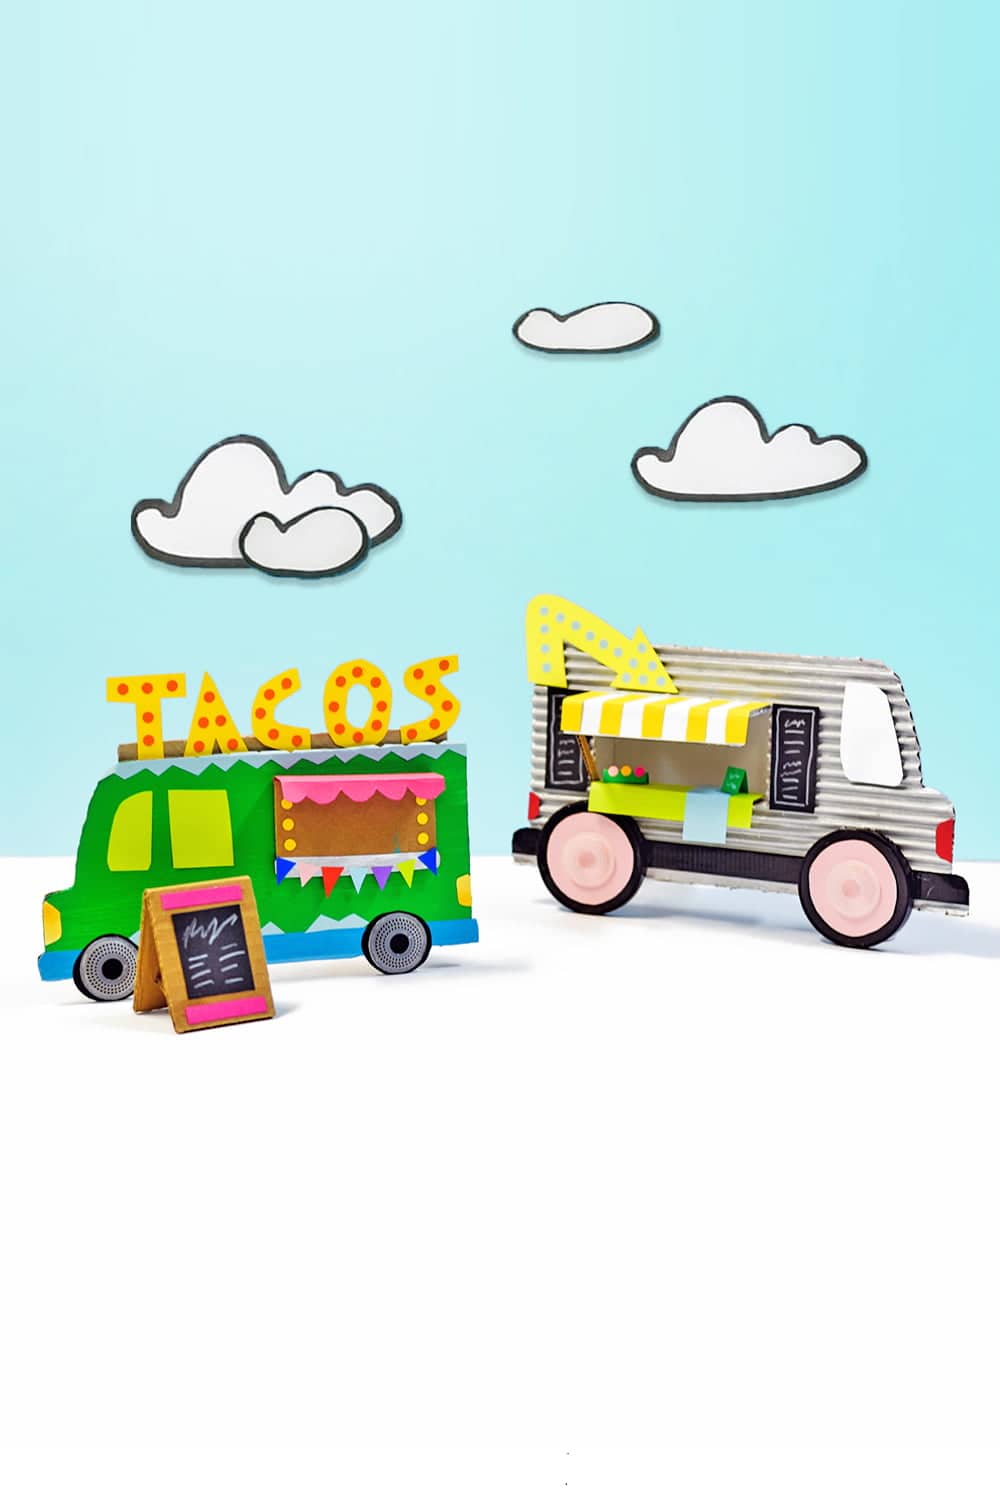 Design your own adorable food truck out of cardboard, paper and recycled puzzle pieces - a creative kids art project! | through barley and birch